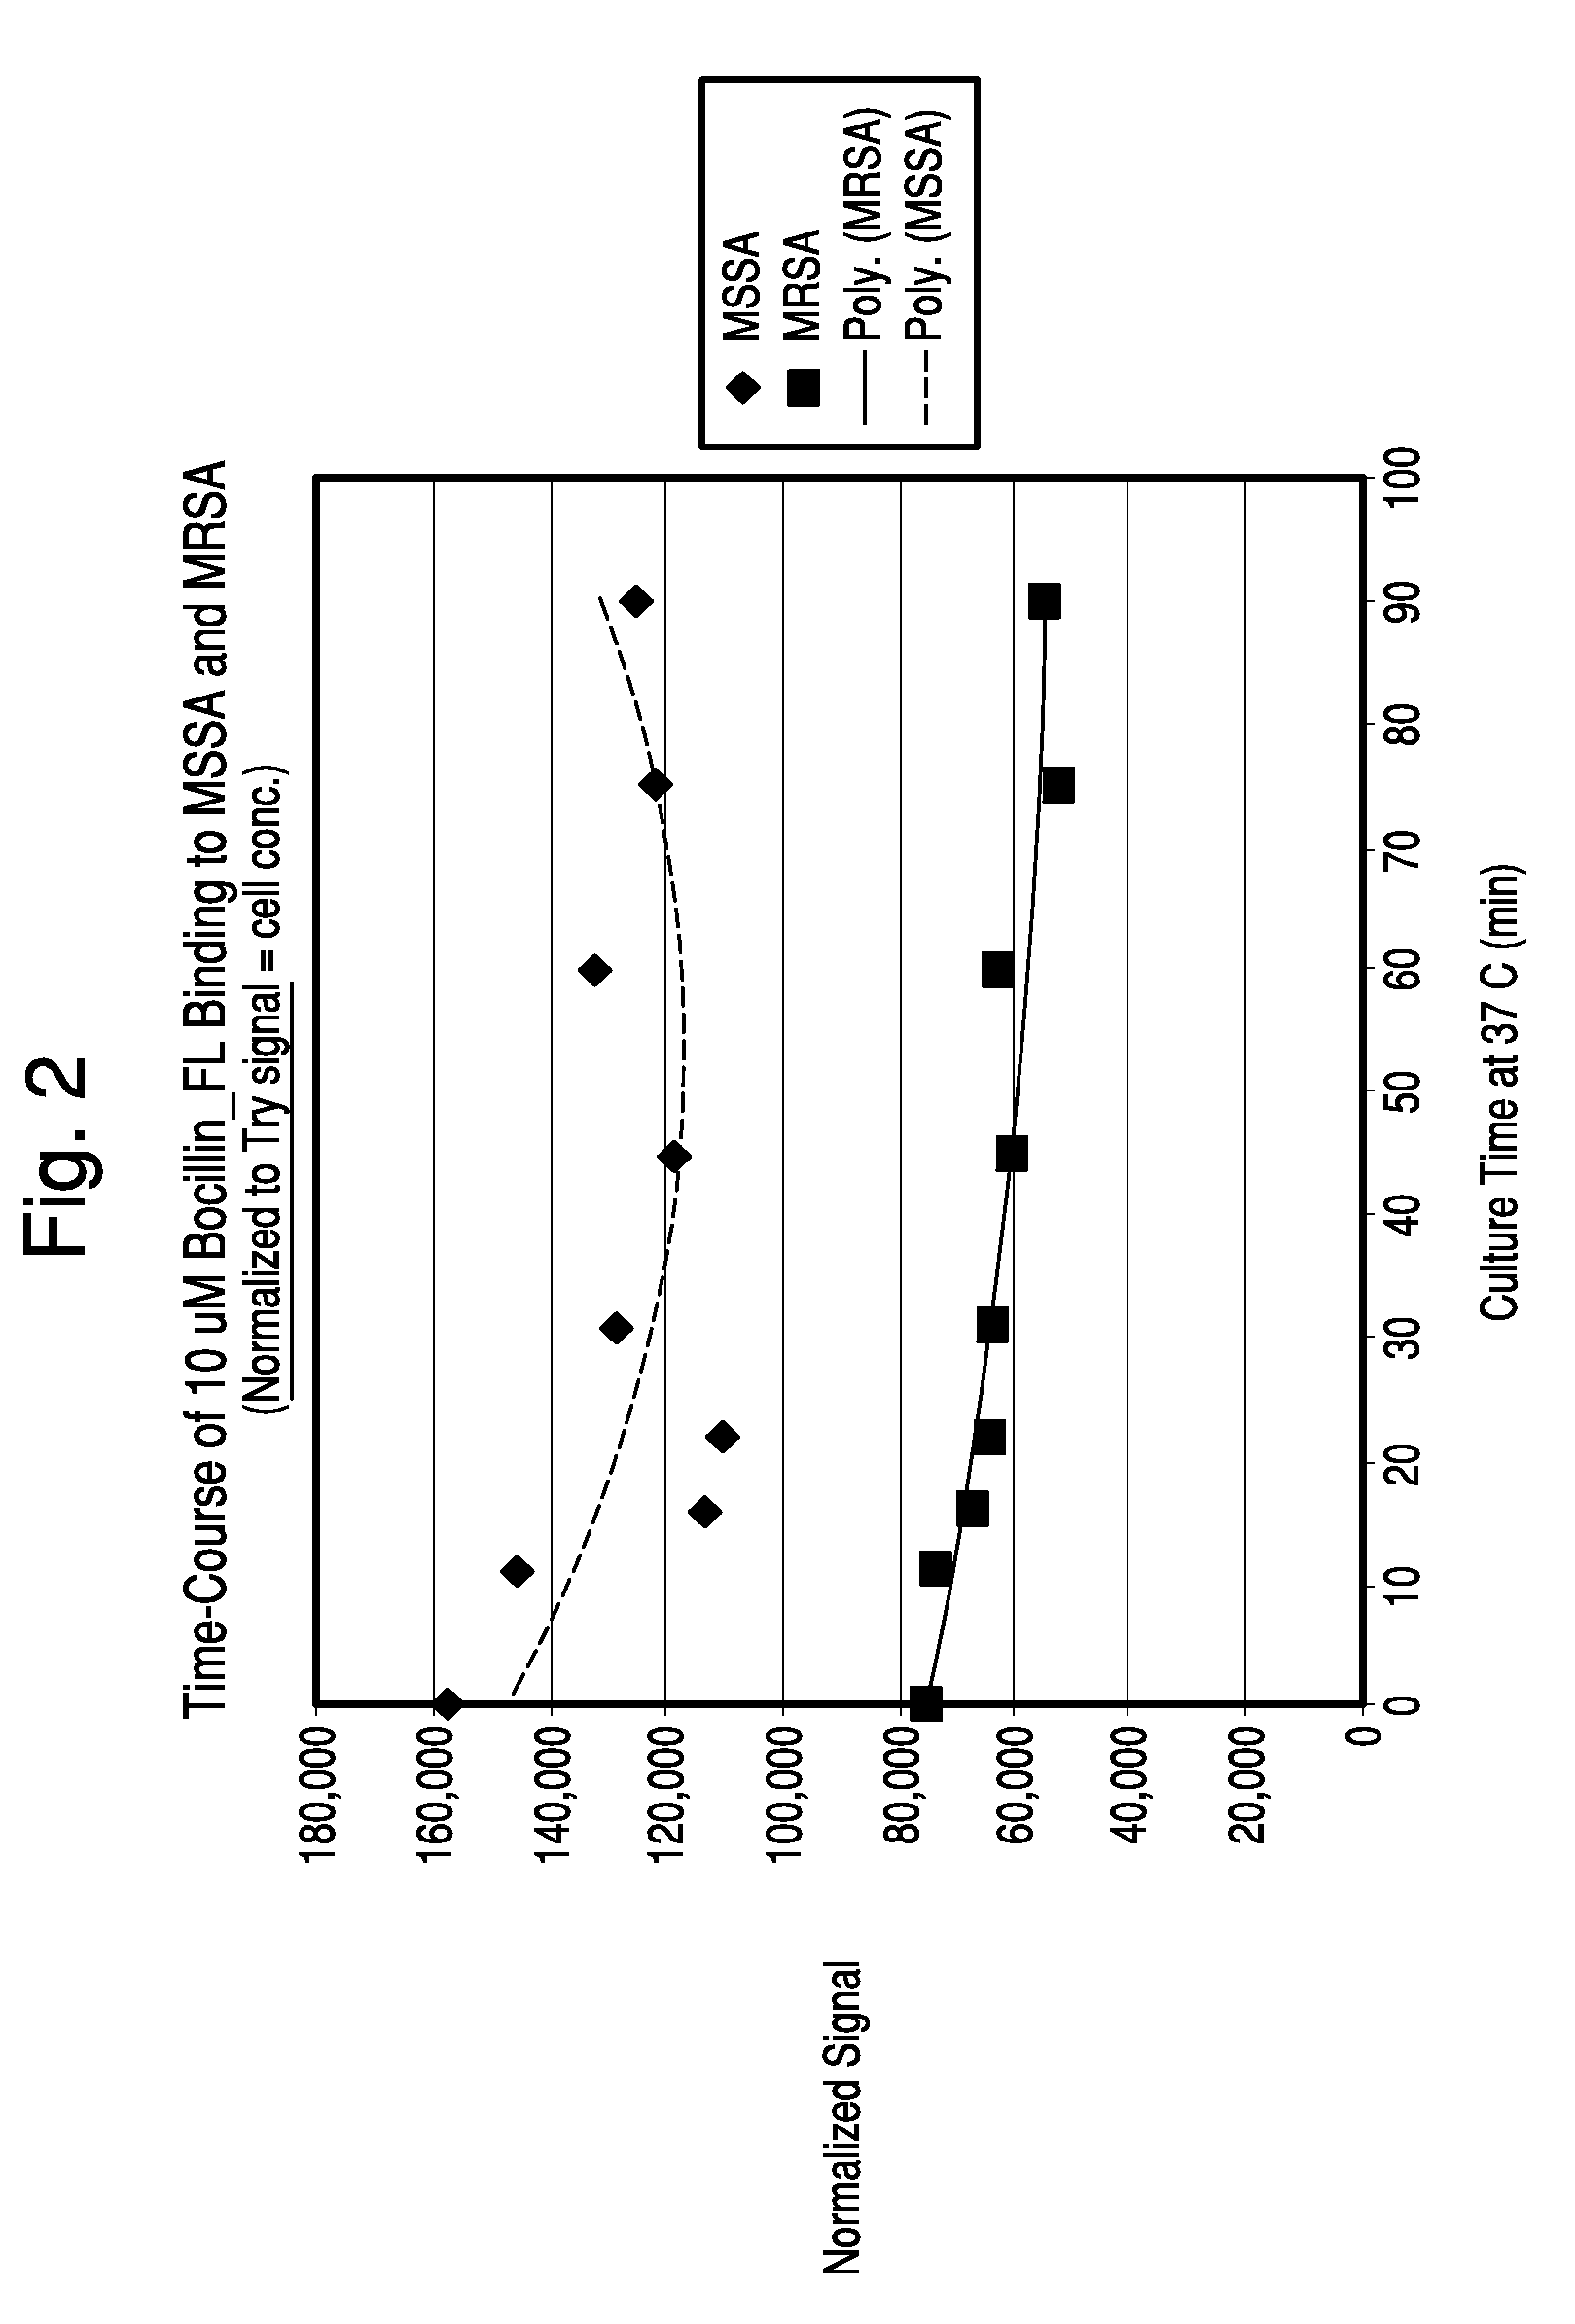 Methods for Antimicrobial Resistance Determination